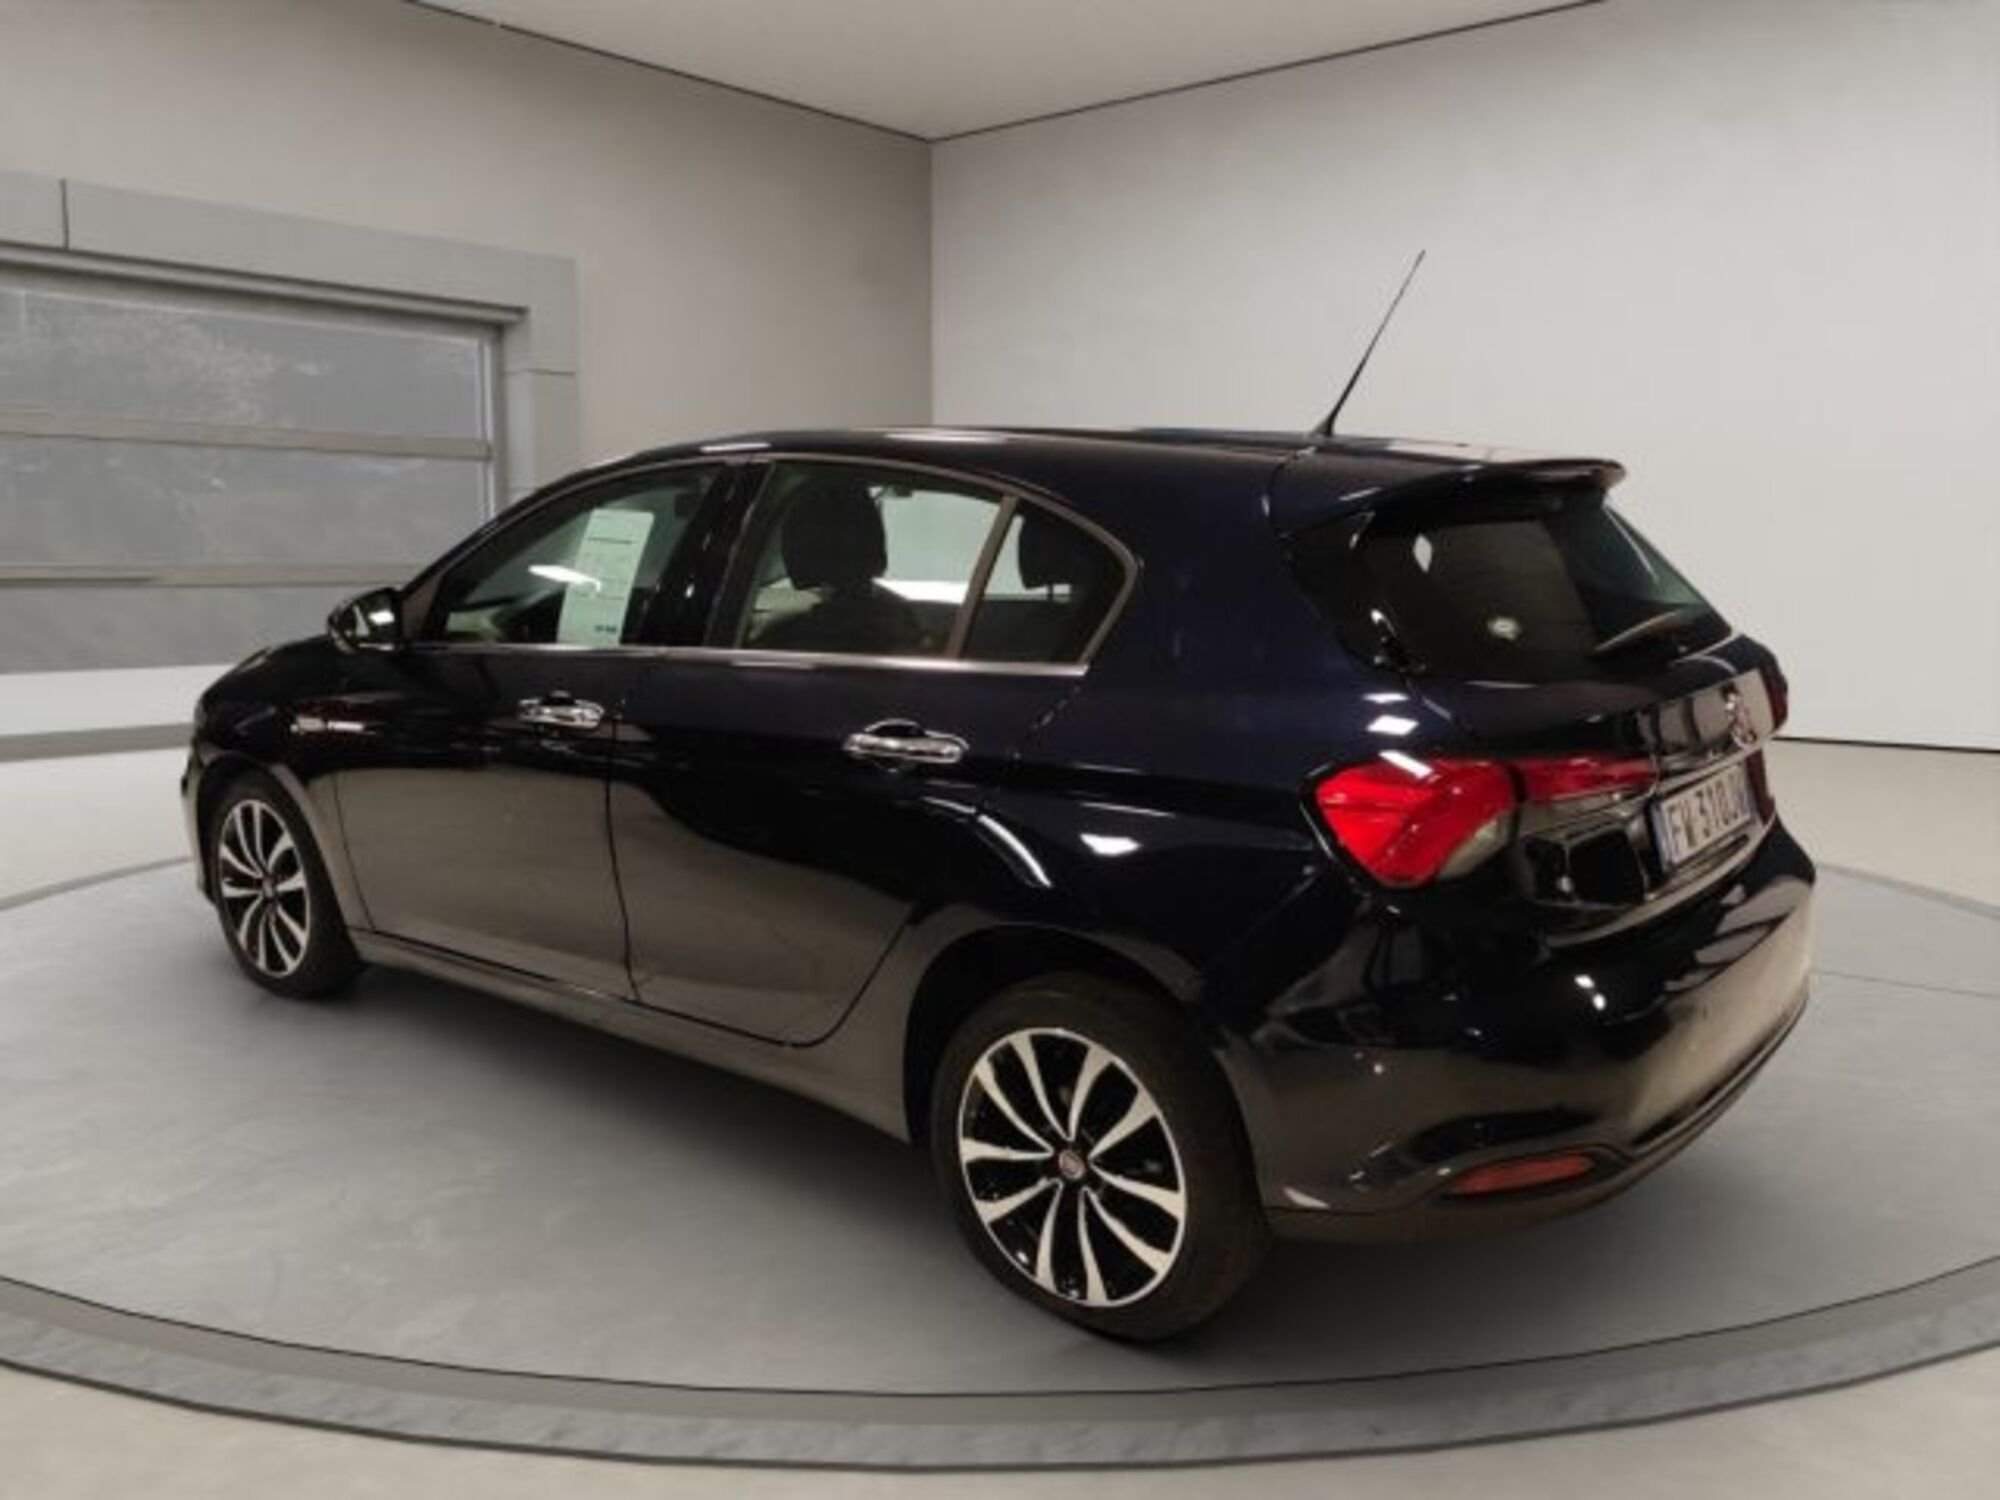 Fiat Tipo Tipo 1.6 Mjt S&S DCT 5 porte Lounge my 16